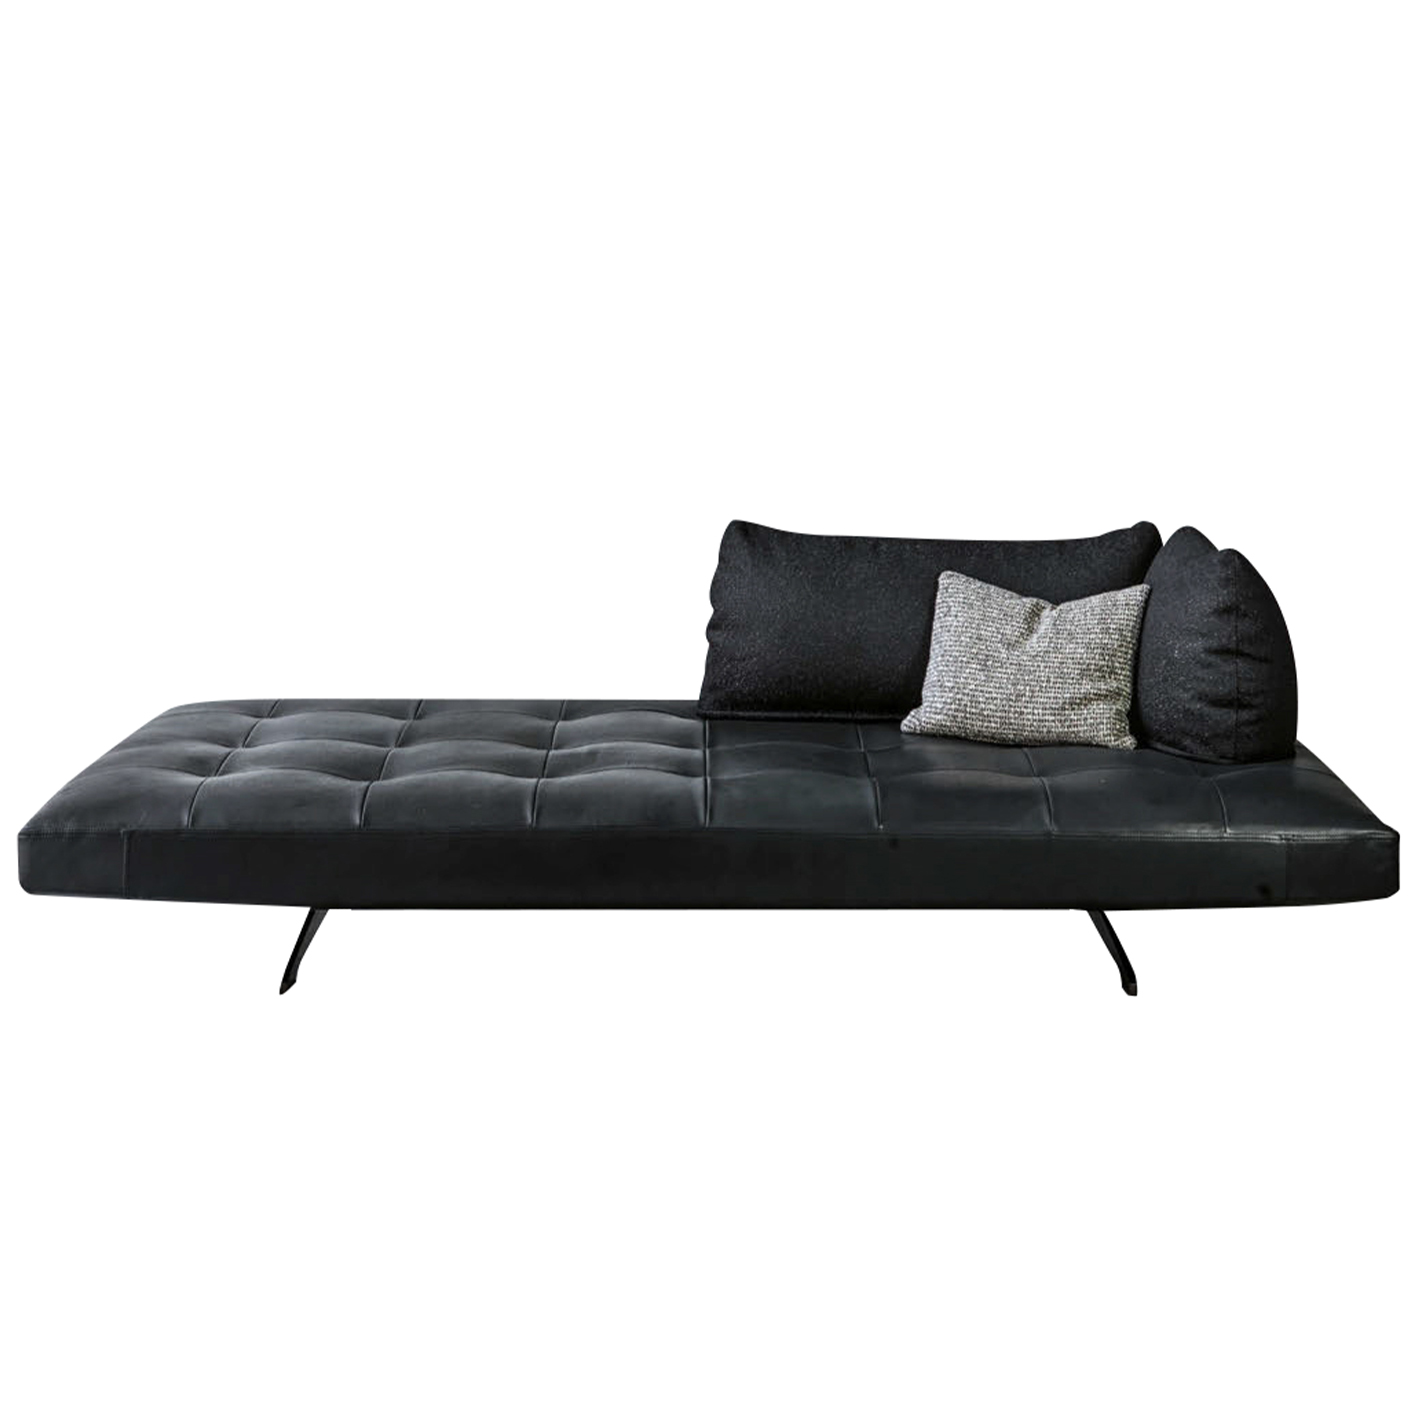 Désirée Divani Sofas - LOVELY DAY CHIC Einzelsofa